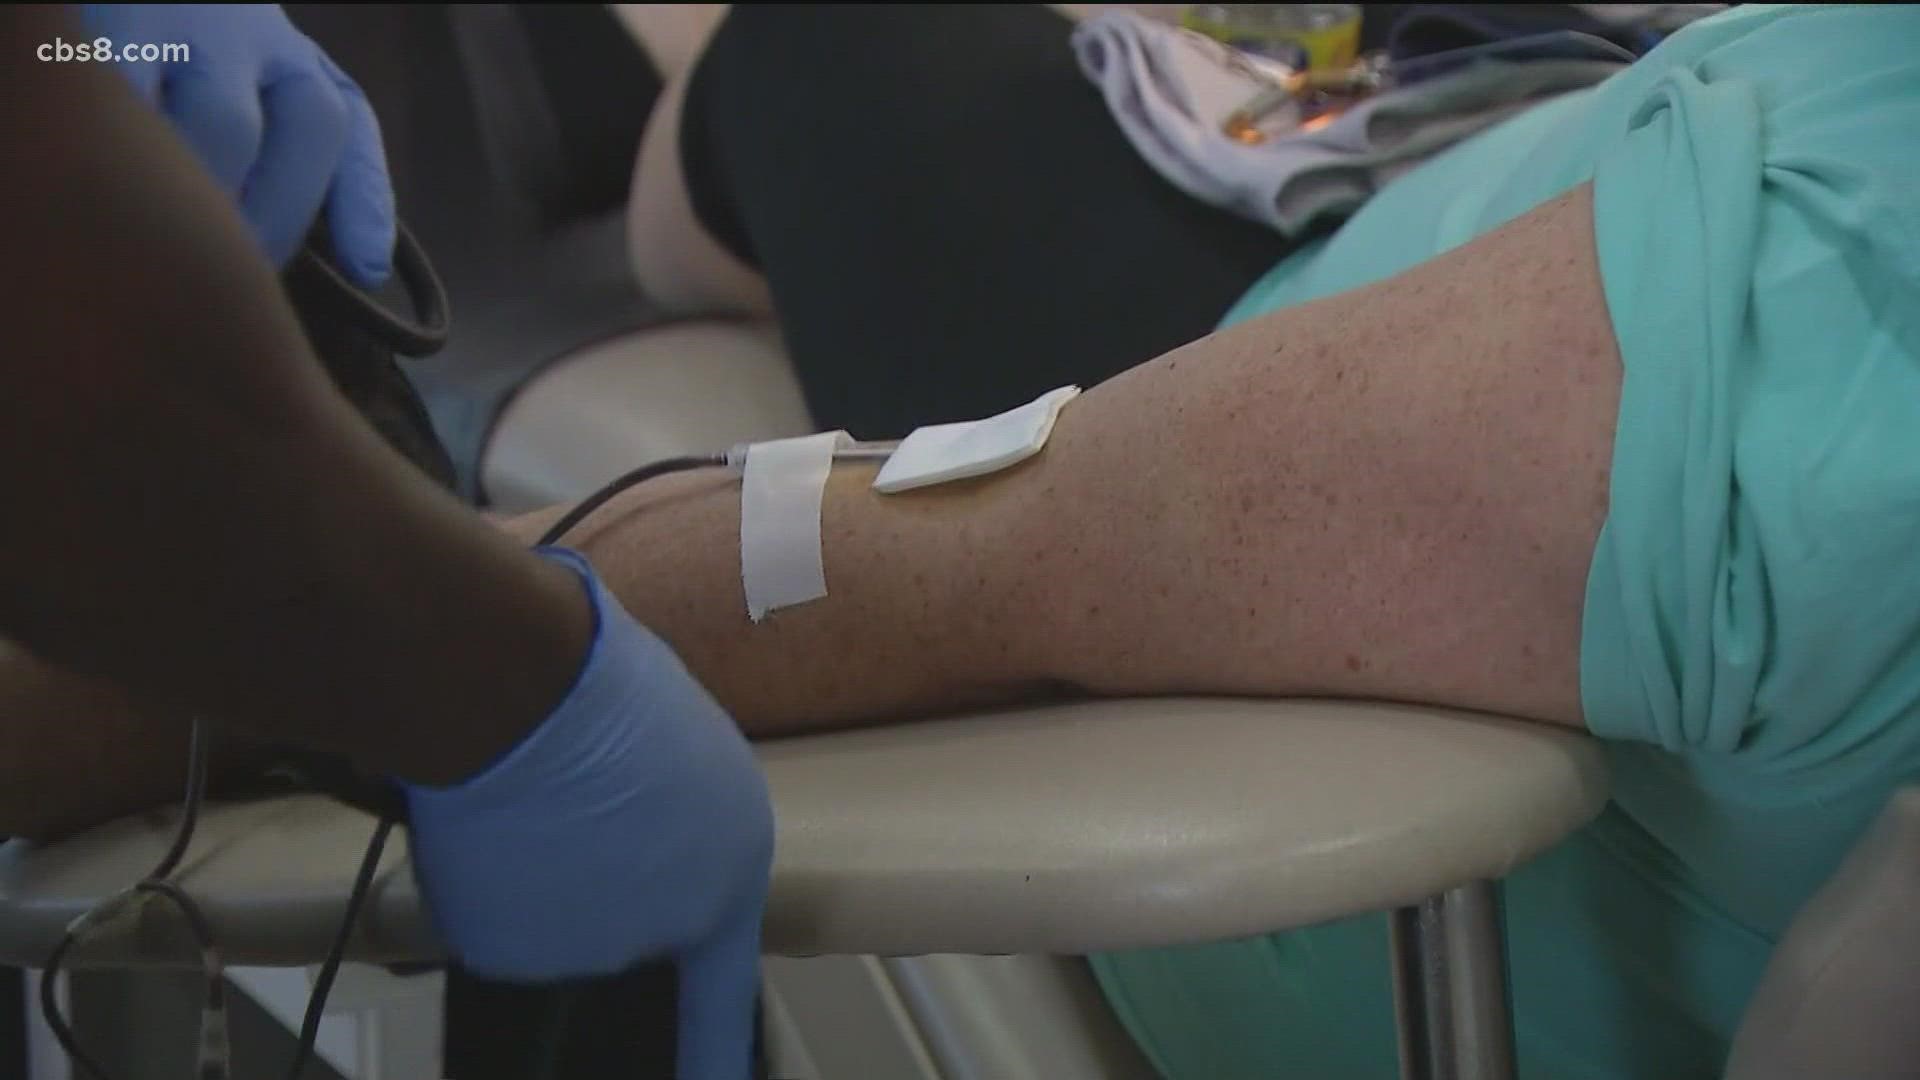 CBS 8 is working with The San Diego Blood Bank on a special drive that happened Tuesday, April 26 at Grossmont Center.